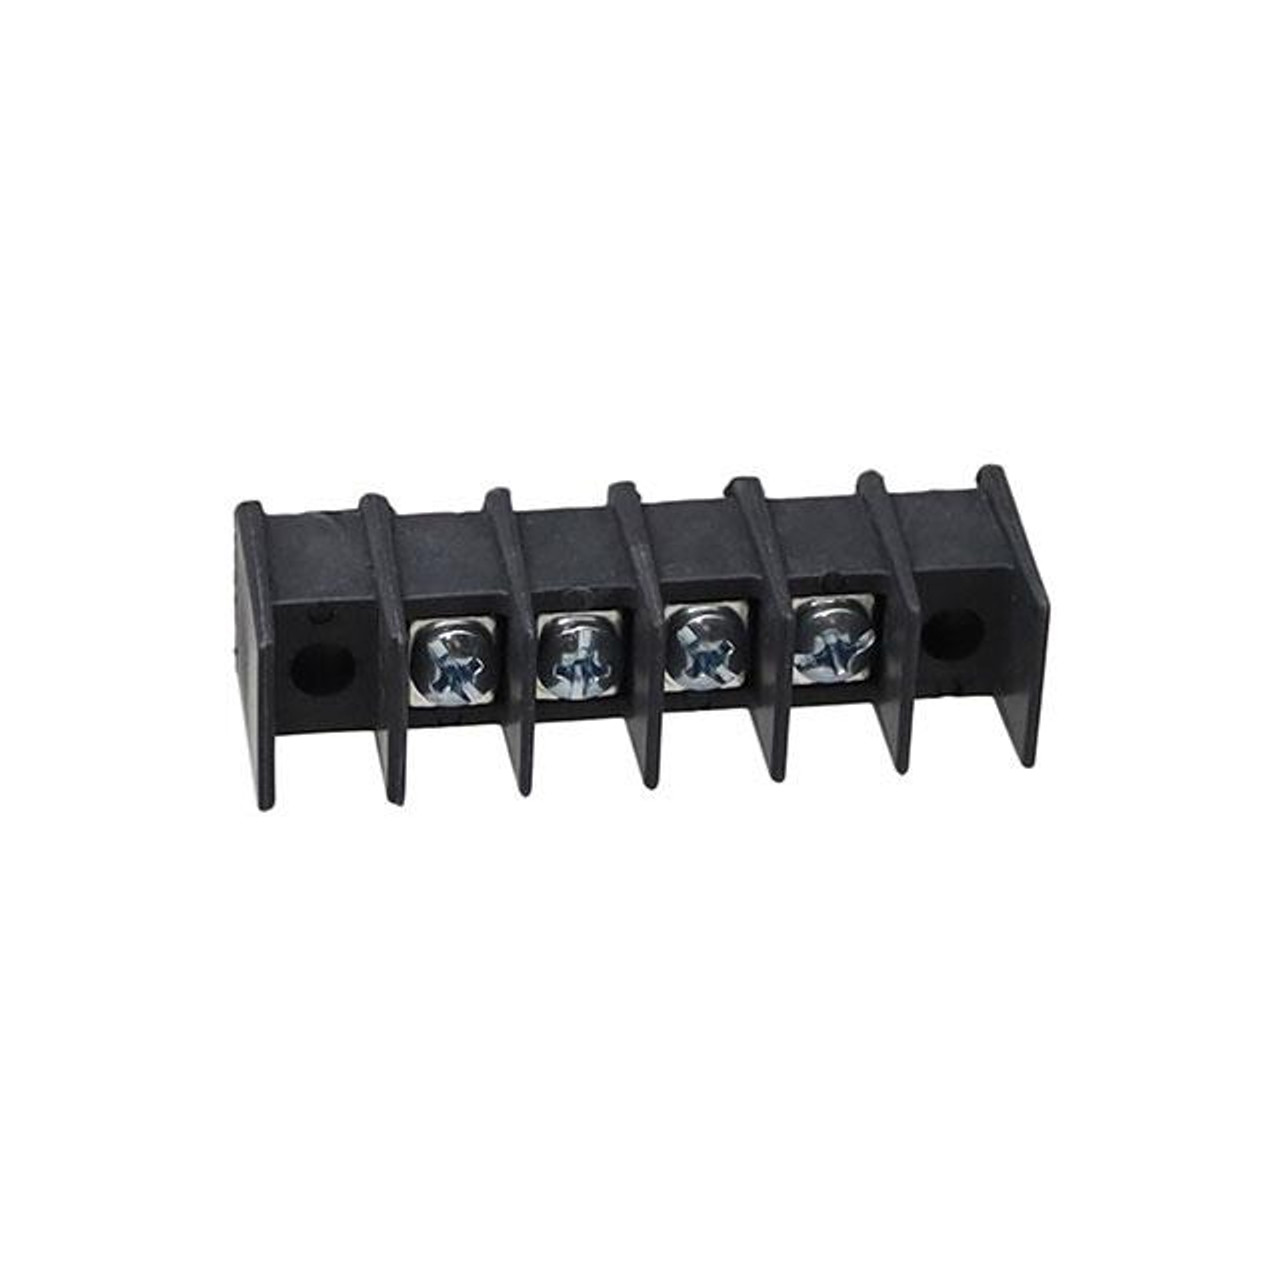 Curtis Industries T38000-04-0 Barrier Style Terminal Blocks